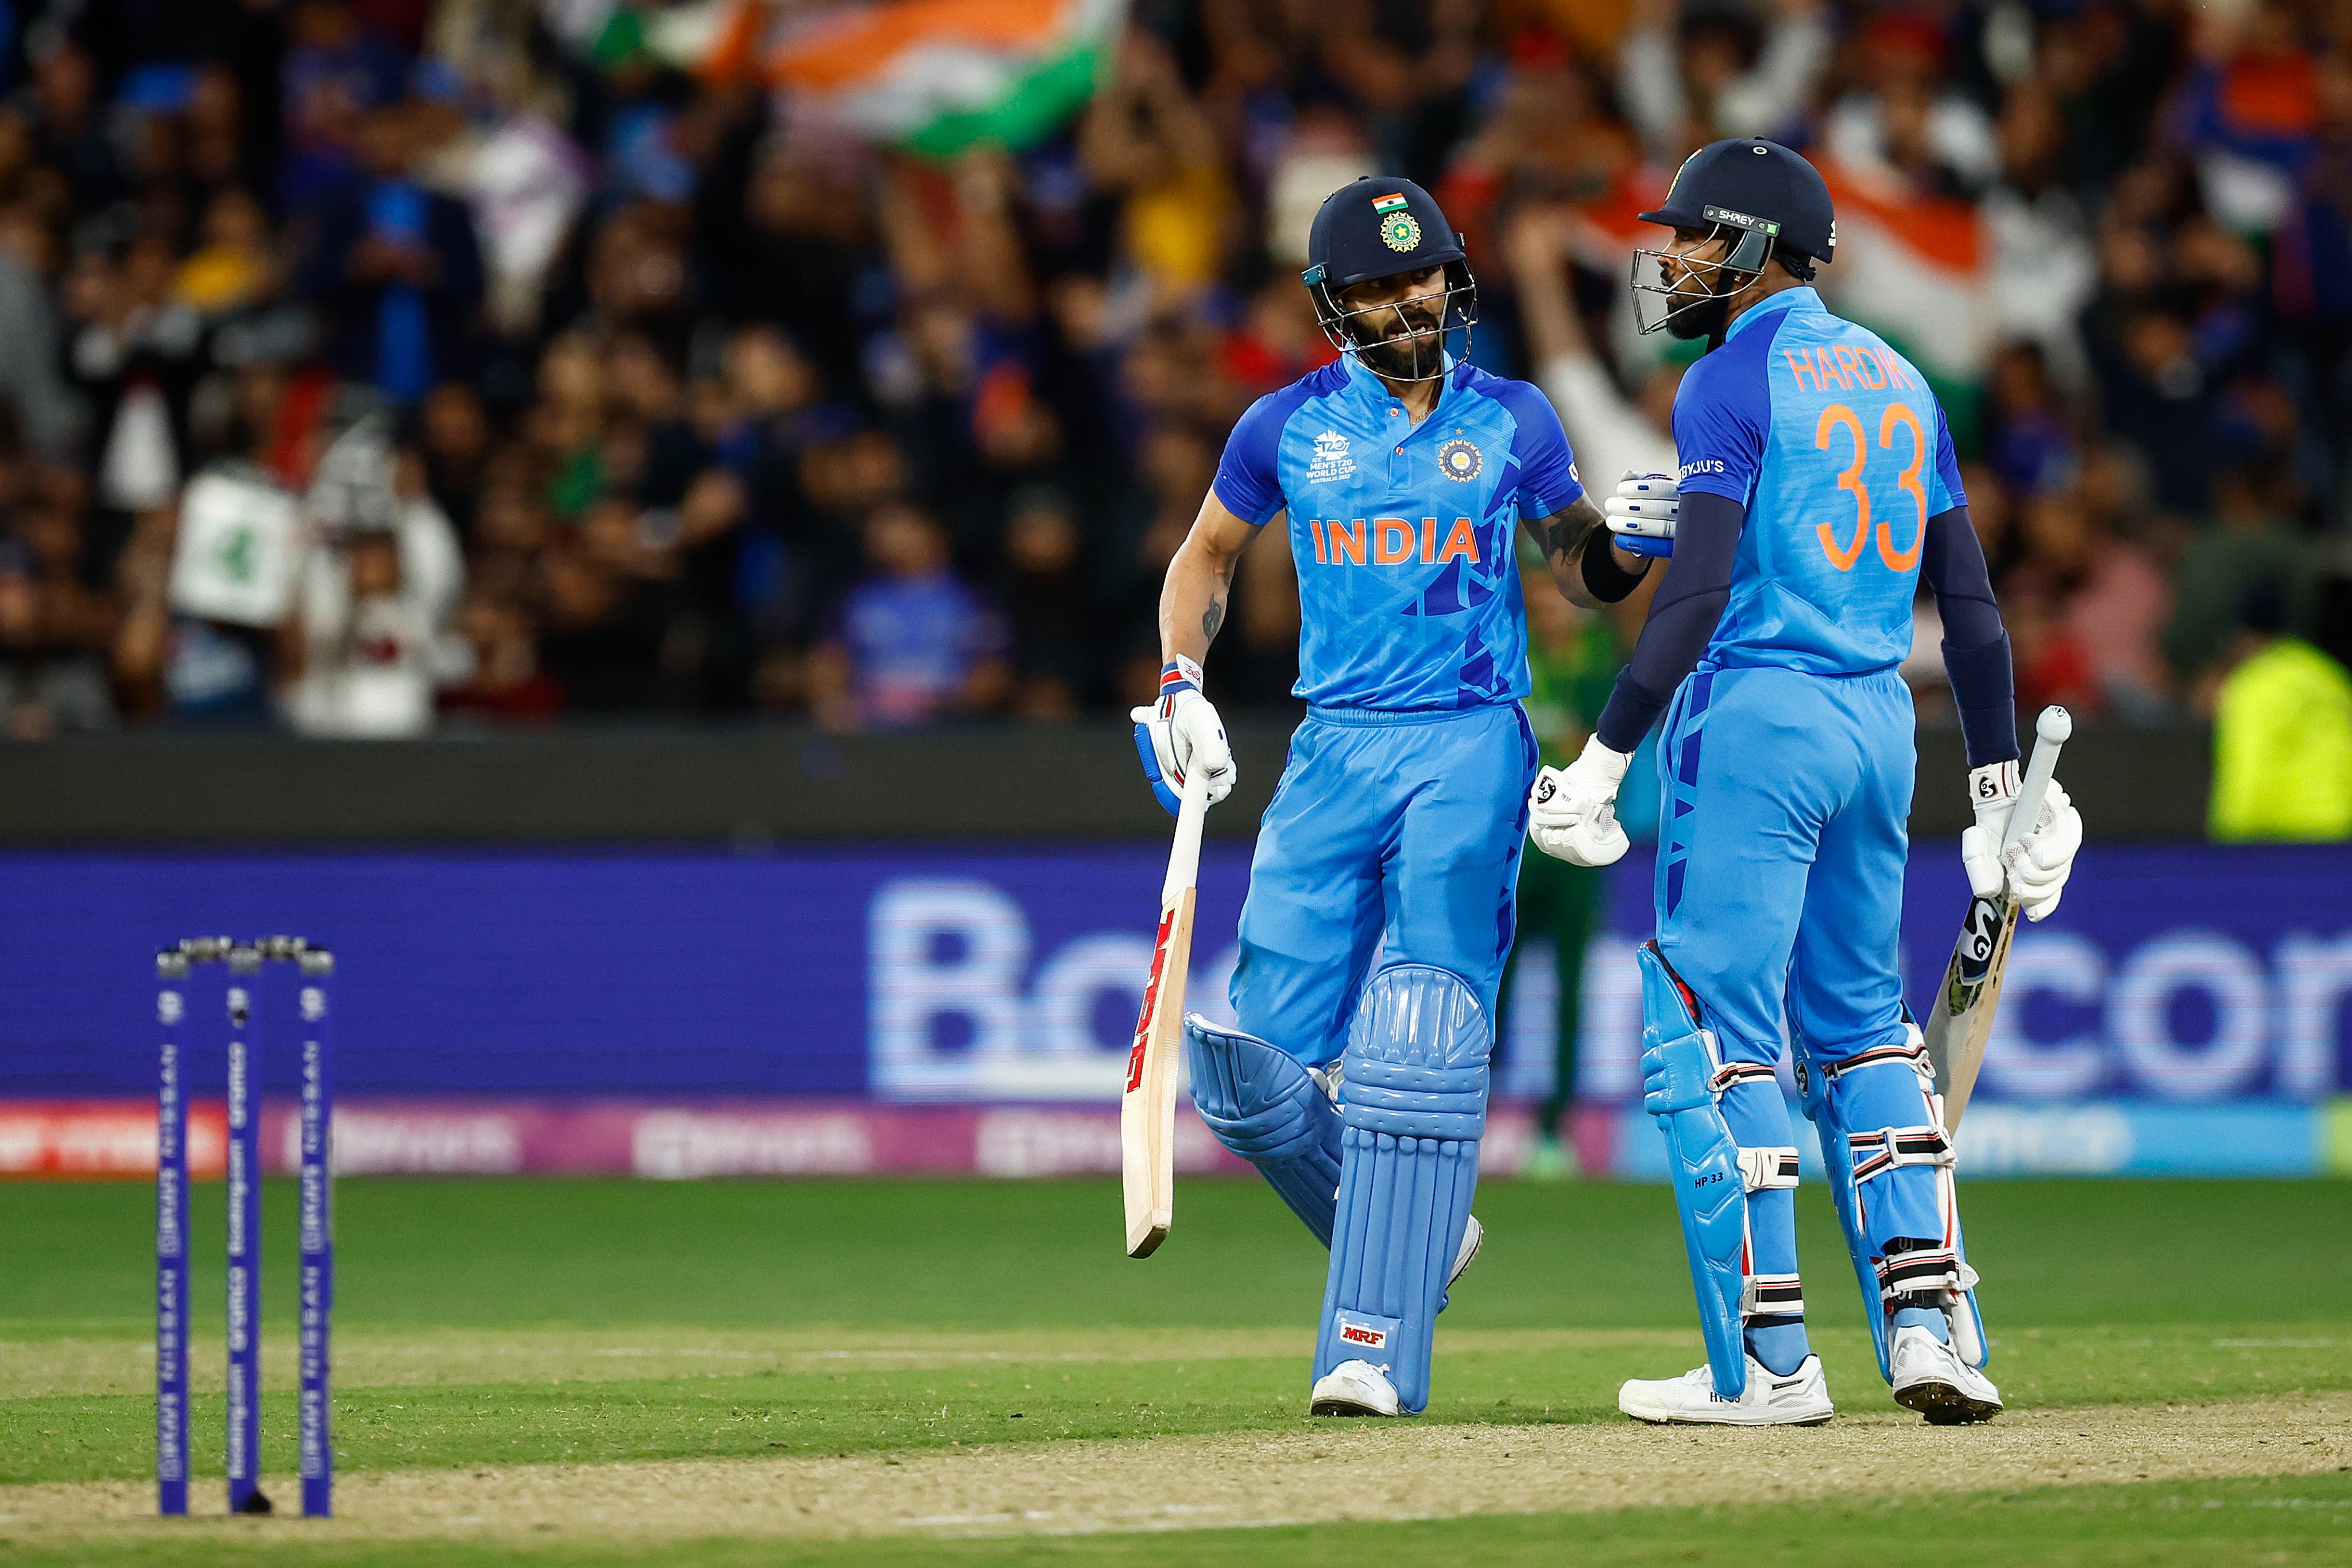 India vs Pakistan: For Happy Diwali, Google CEO Sundar Pichai views replay of Virat Kohli masterclass in India-Pakistan game and wittily responds to troll - CHECK Out